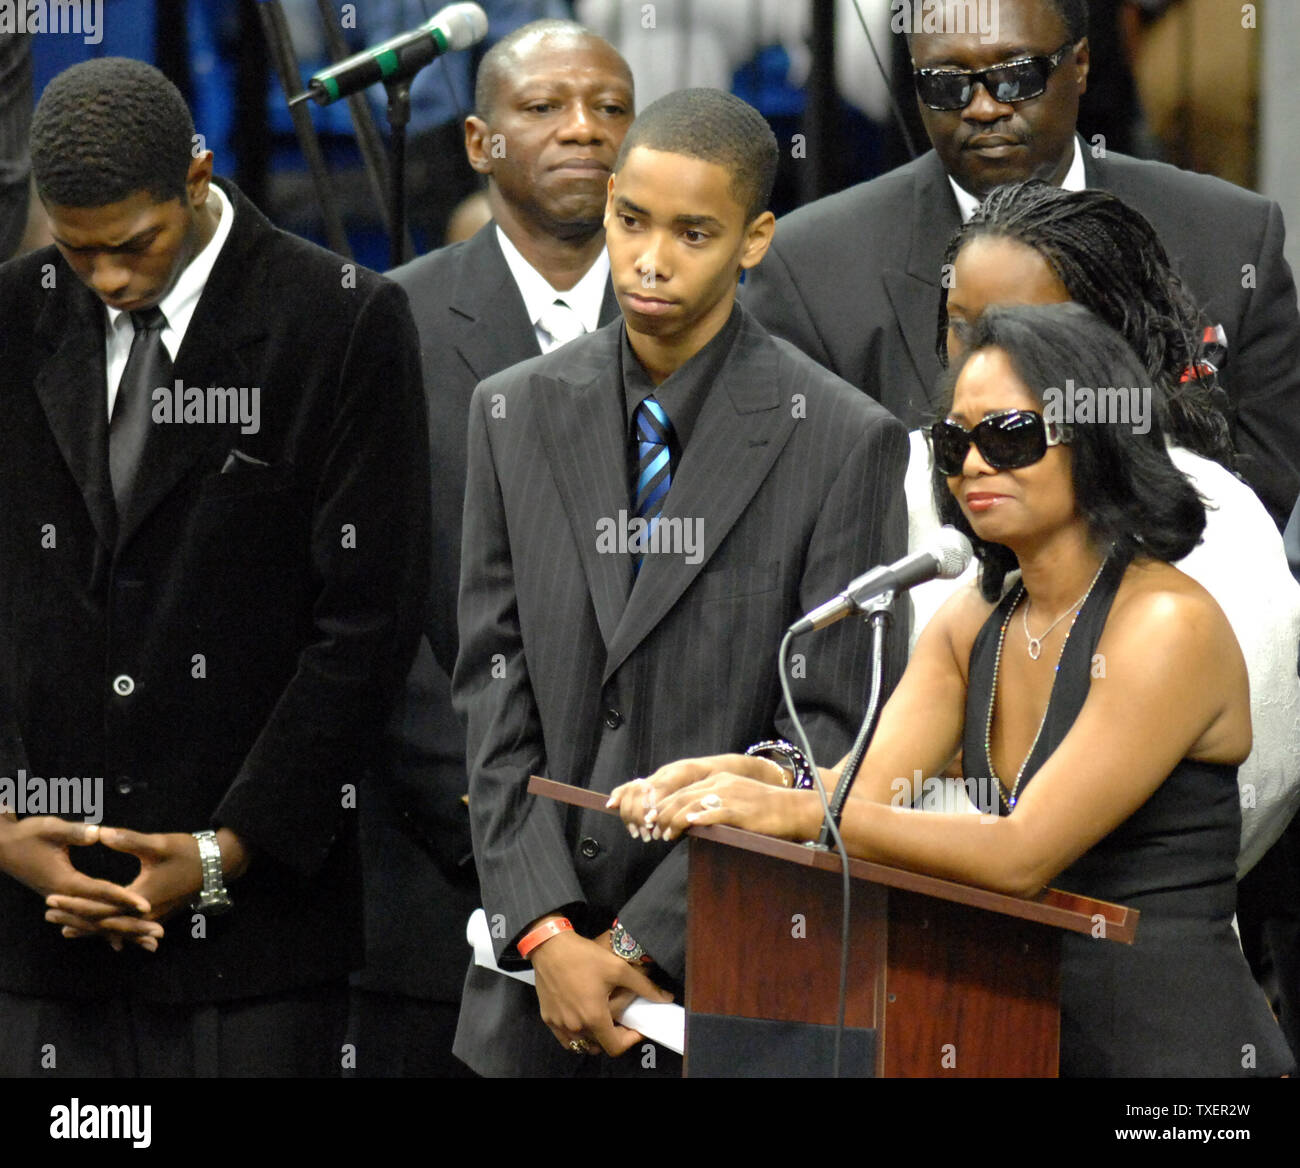 Deanna Brown, daughter of singer James Brown, and family members gather around the podium during Brown's funeral service in the James Brown Arena in Augusta, Georgia, December 30, 2006. Brown died of congestive heart failure on December 25, 2006. (UPI Photo/John Dickerson) Stock Photo